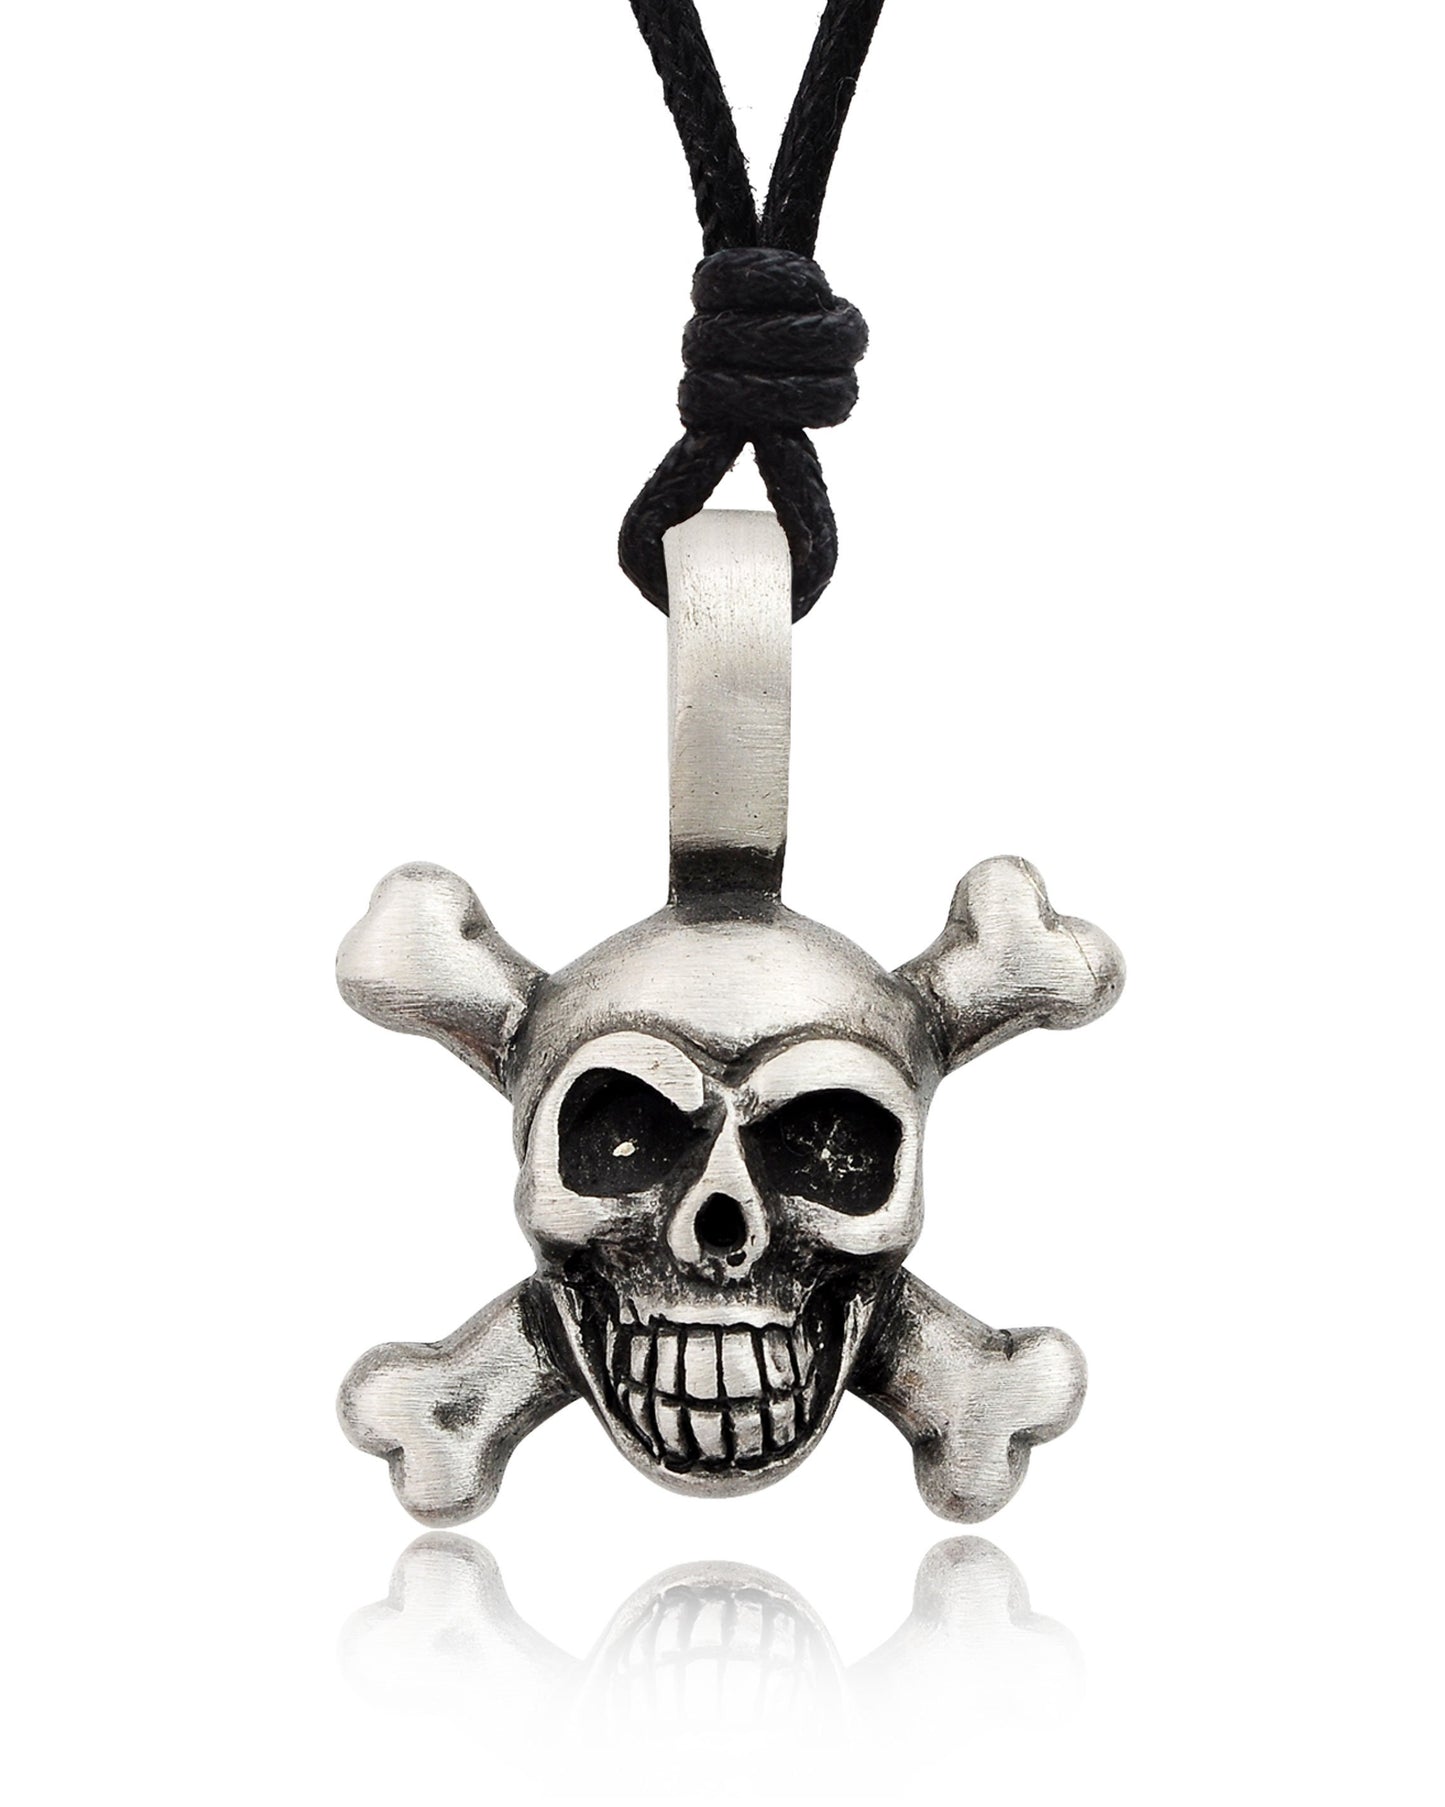 Skull Skeleton Silver Pewter Charm Necklace Pendant Jewelry